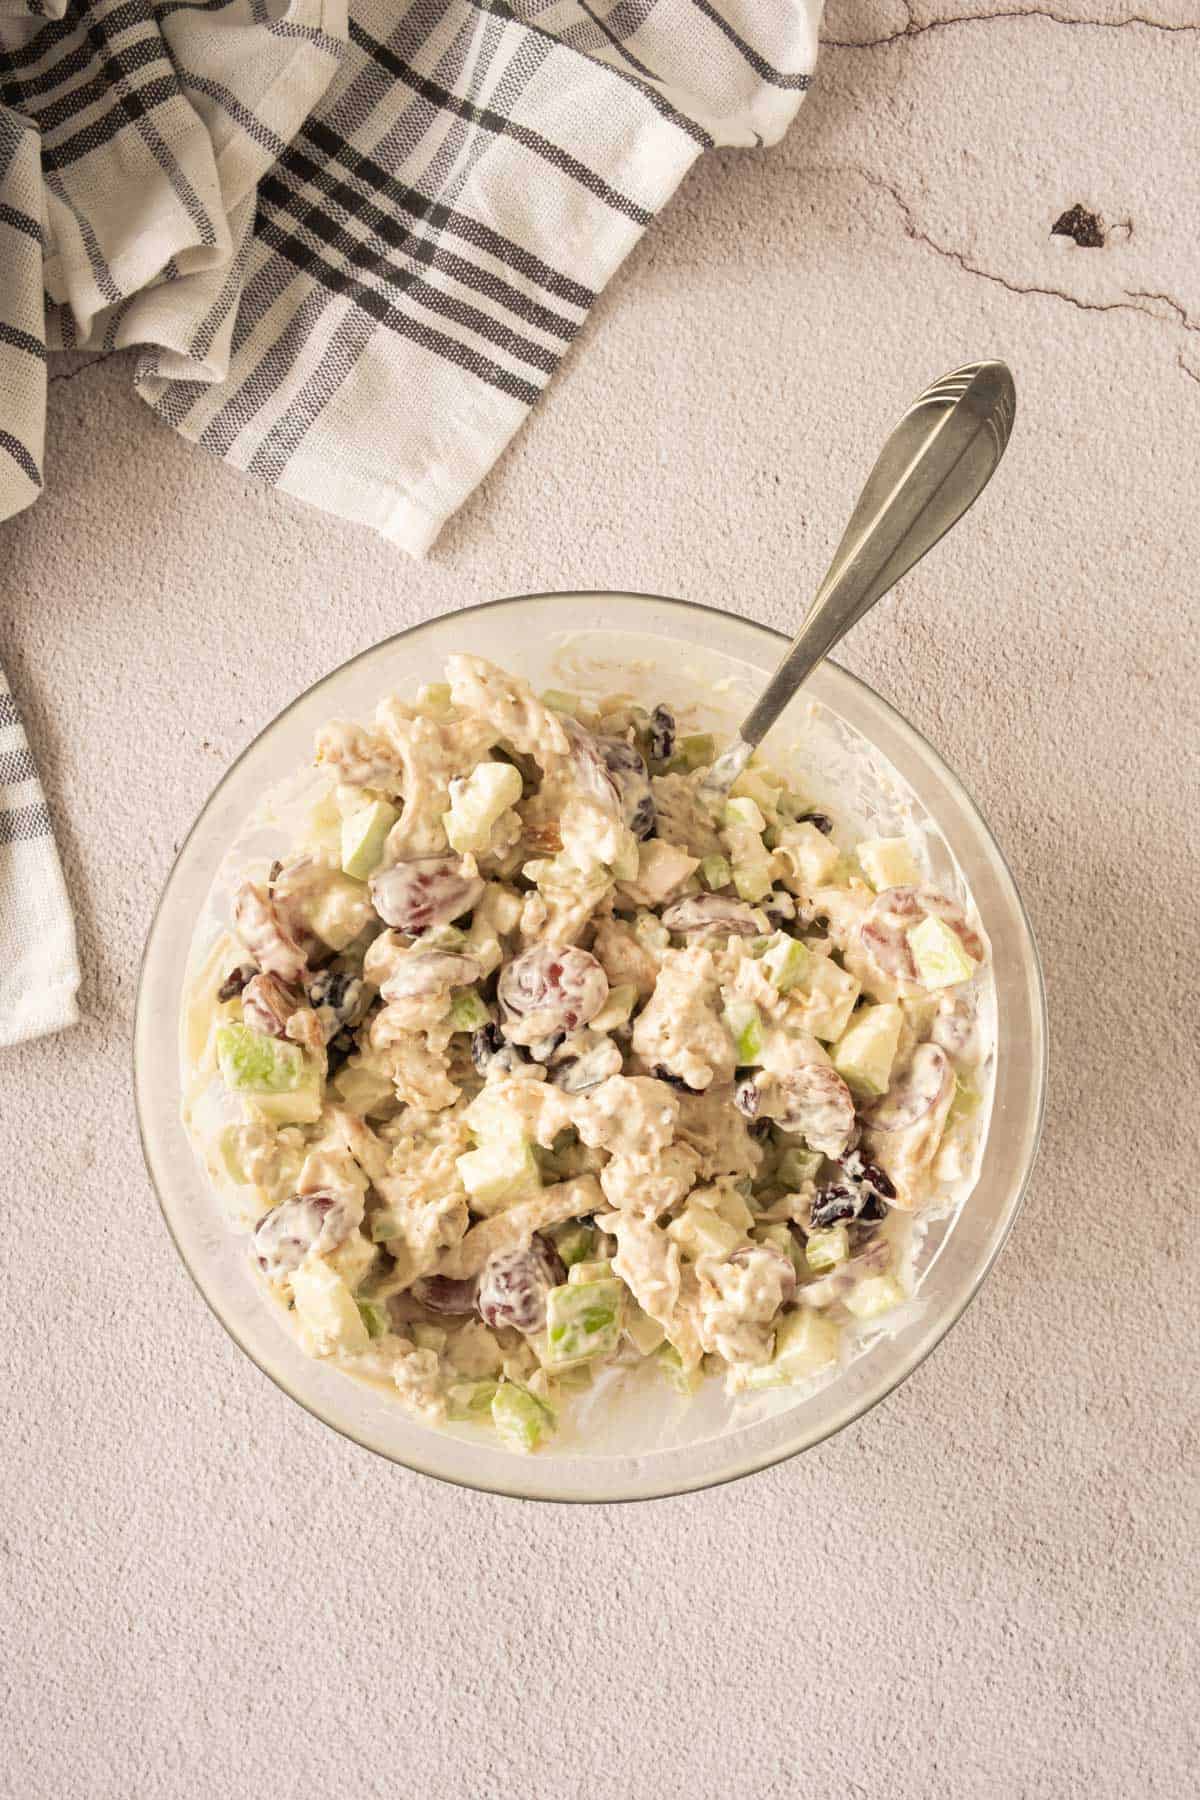 A bowl of Waldorf chicken salad on a table next to a napkin.